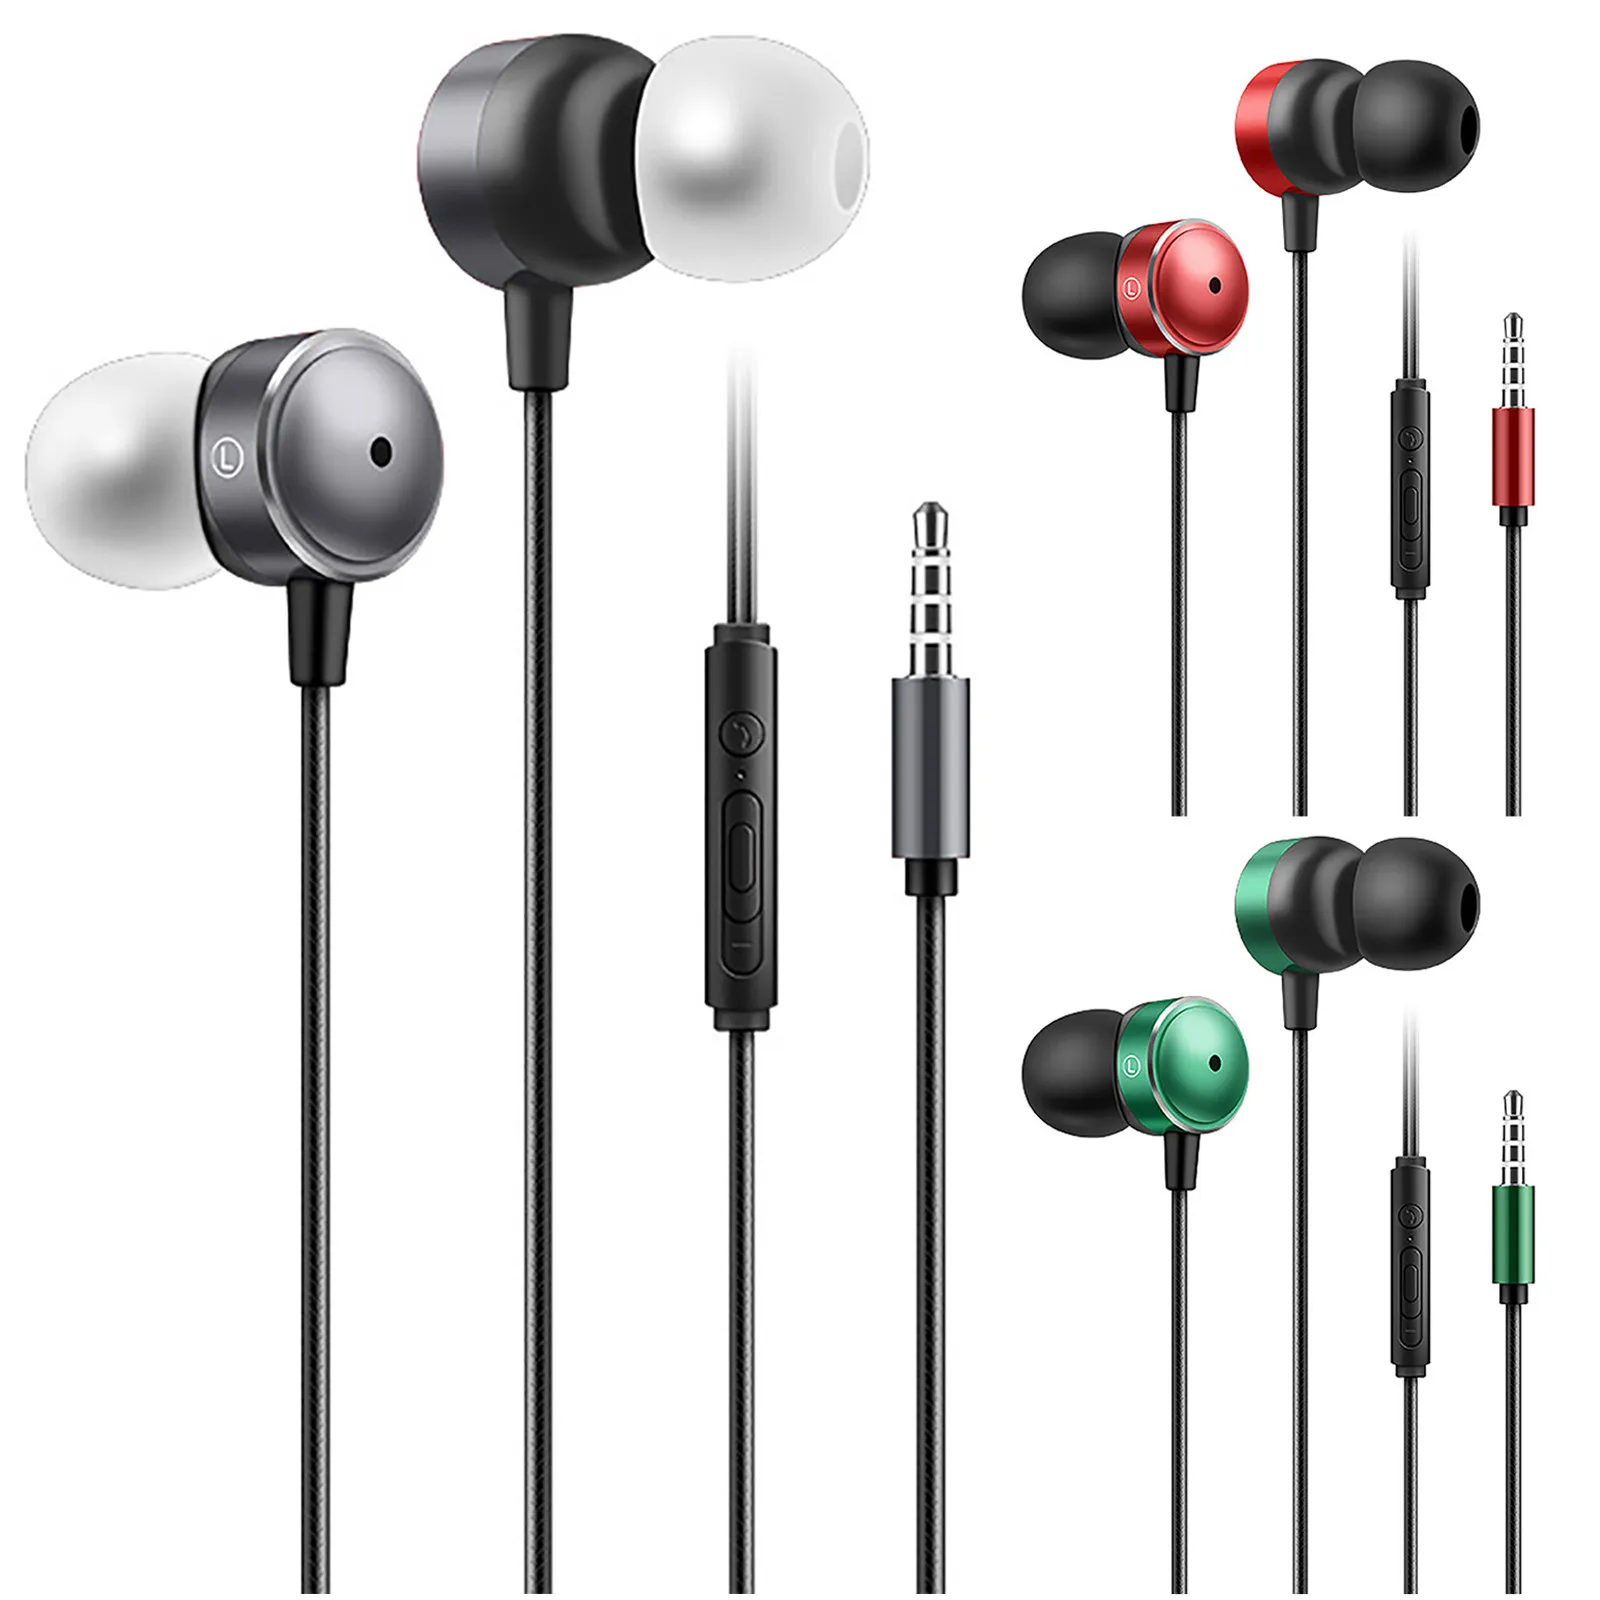 

Earphones In Ear Headphones With Microphone 3.5mm Wired Earbuds For Ios And Android Smartphones Laptops Head Phones for Computer